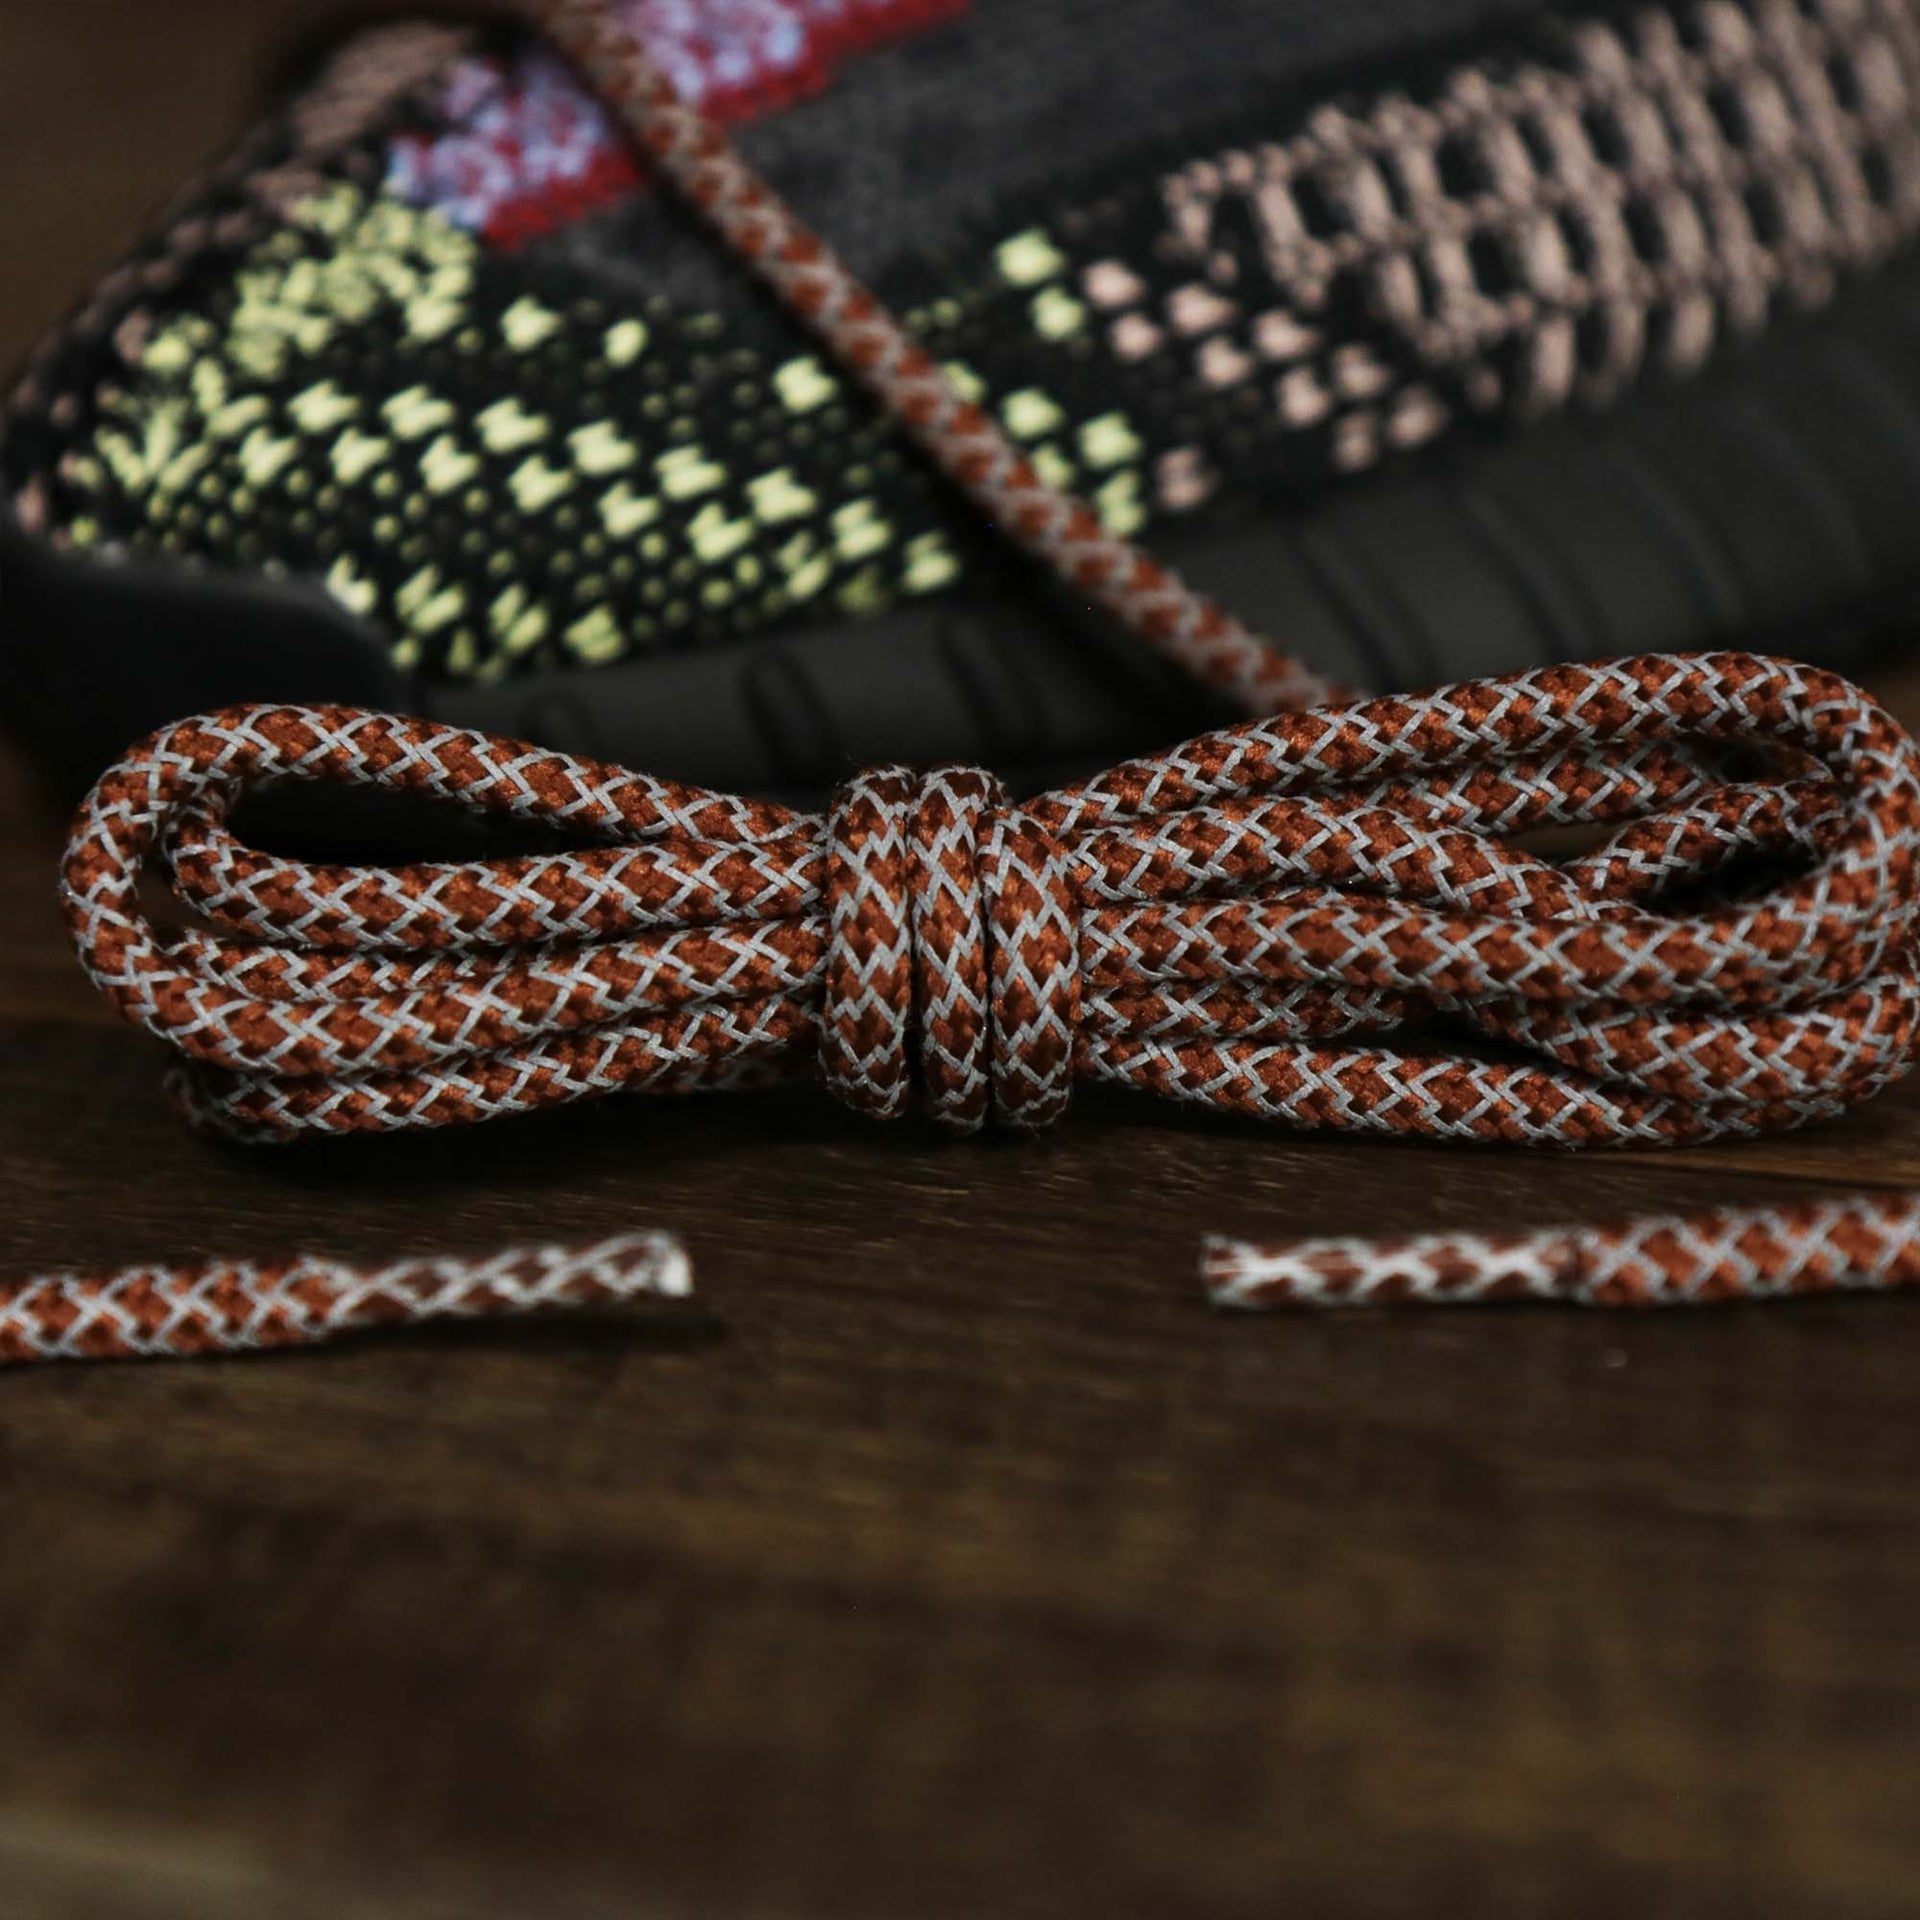 The 3M Reflective Brown Solid Shoelaces with Brown Aglets | 120cm Capswag folded up